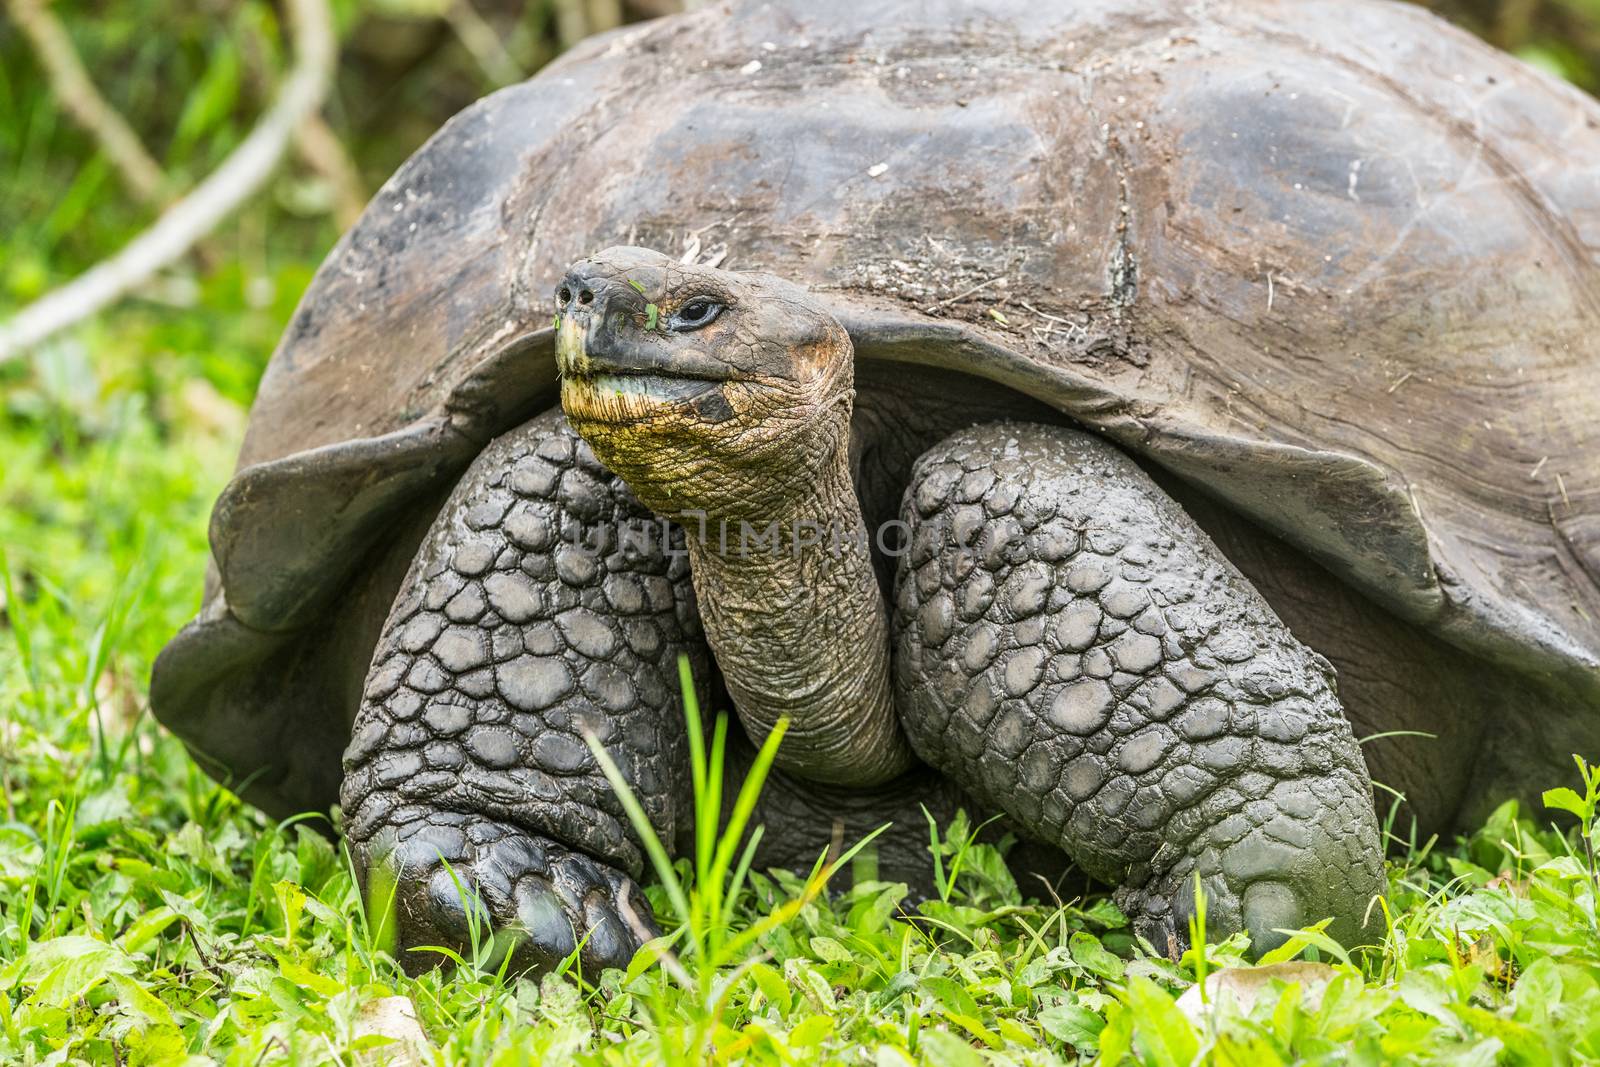 Animals. Galapagos Giant Tortoise on Santa Cruz Island in Galapagos Islands. Animals, nature and wildlife photo close up of tortoises in the highlands of Galapagos, Ecuador, South America.